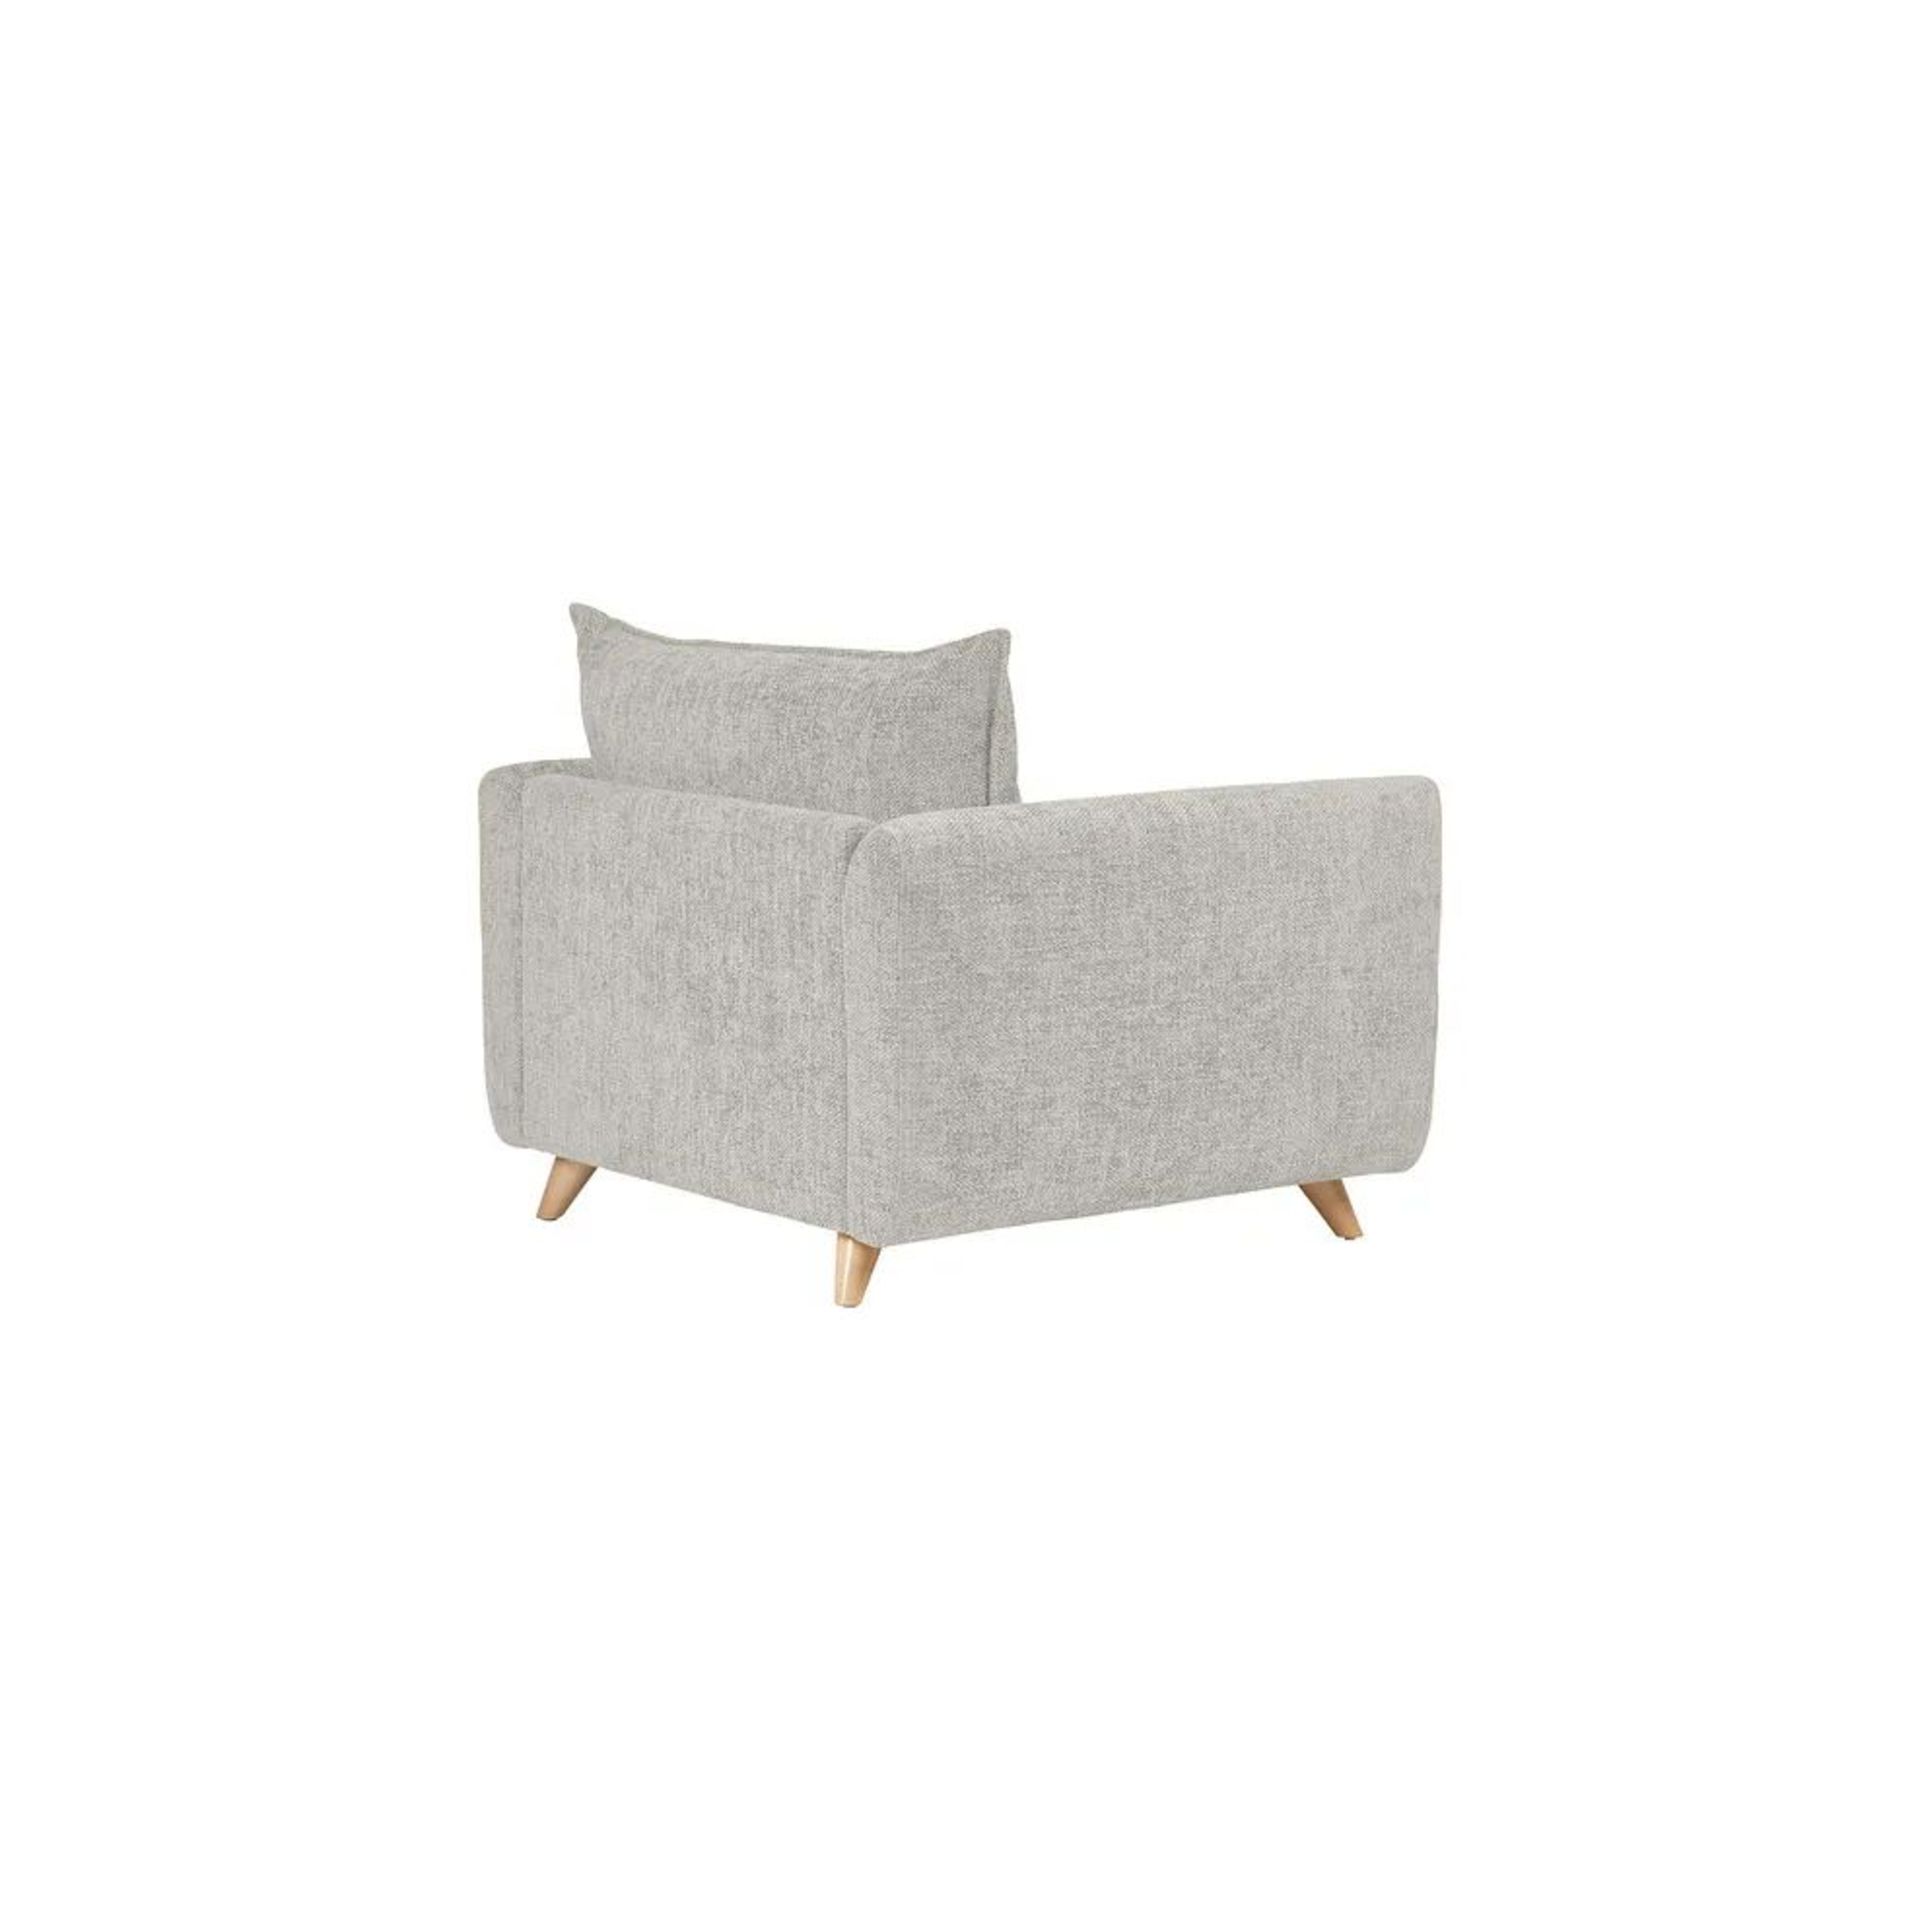 BRAND NEW DALBY High Back Loveseat - SILVER FABRIC. RRP £1149. Our Dalby loveseat, shown here in - Bild 3 aus 6